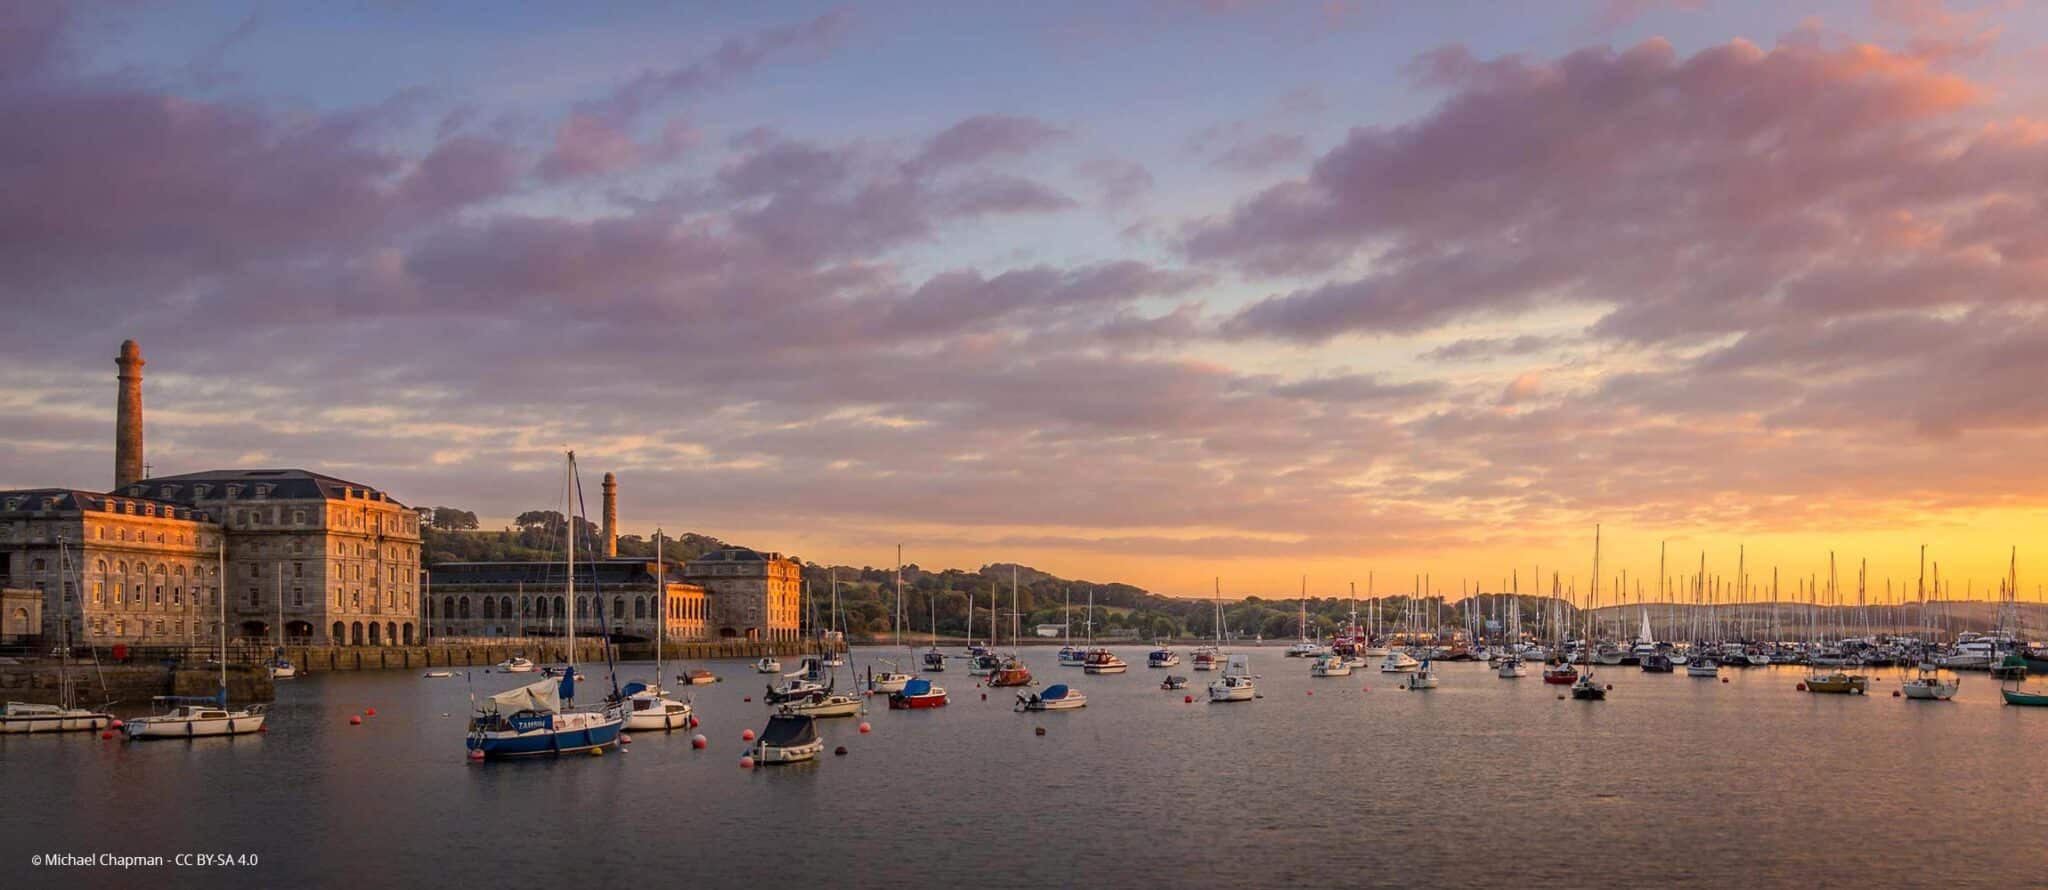 Royal William Yard in Plymouth at sunset - photo by Michael Chapman